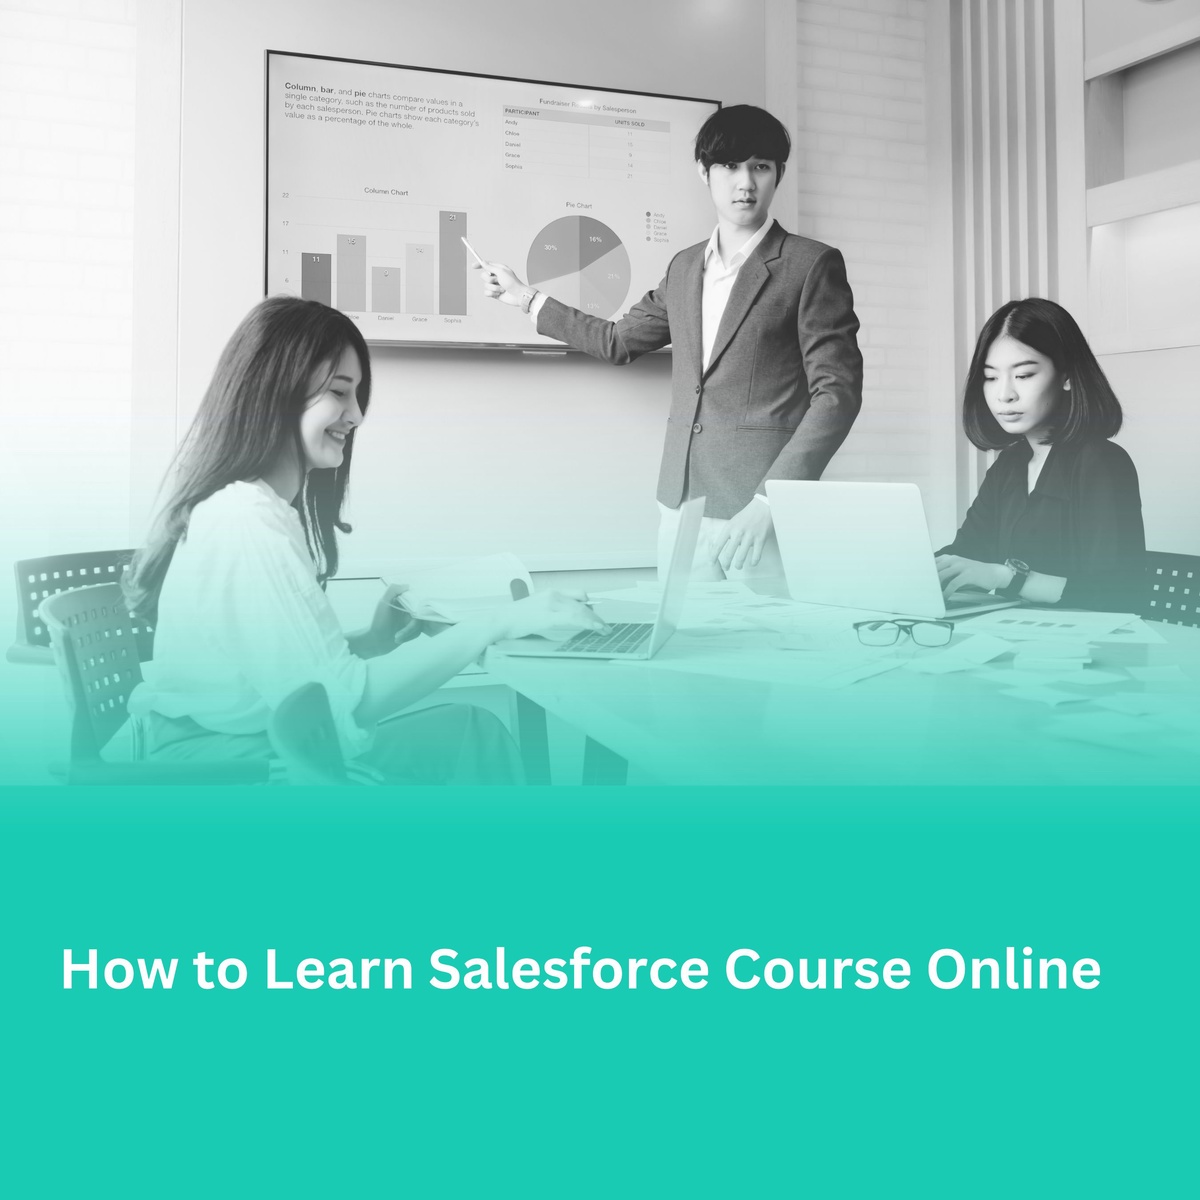 How to Learn Salesforce Course Online